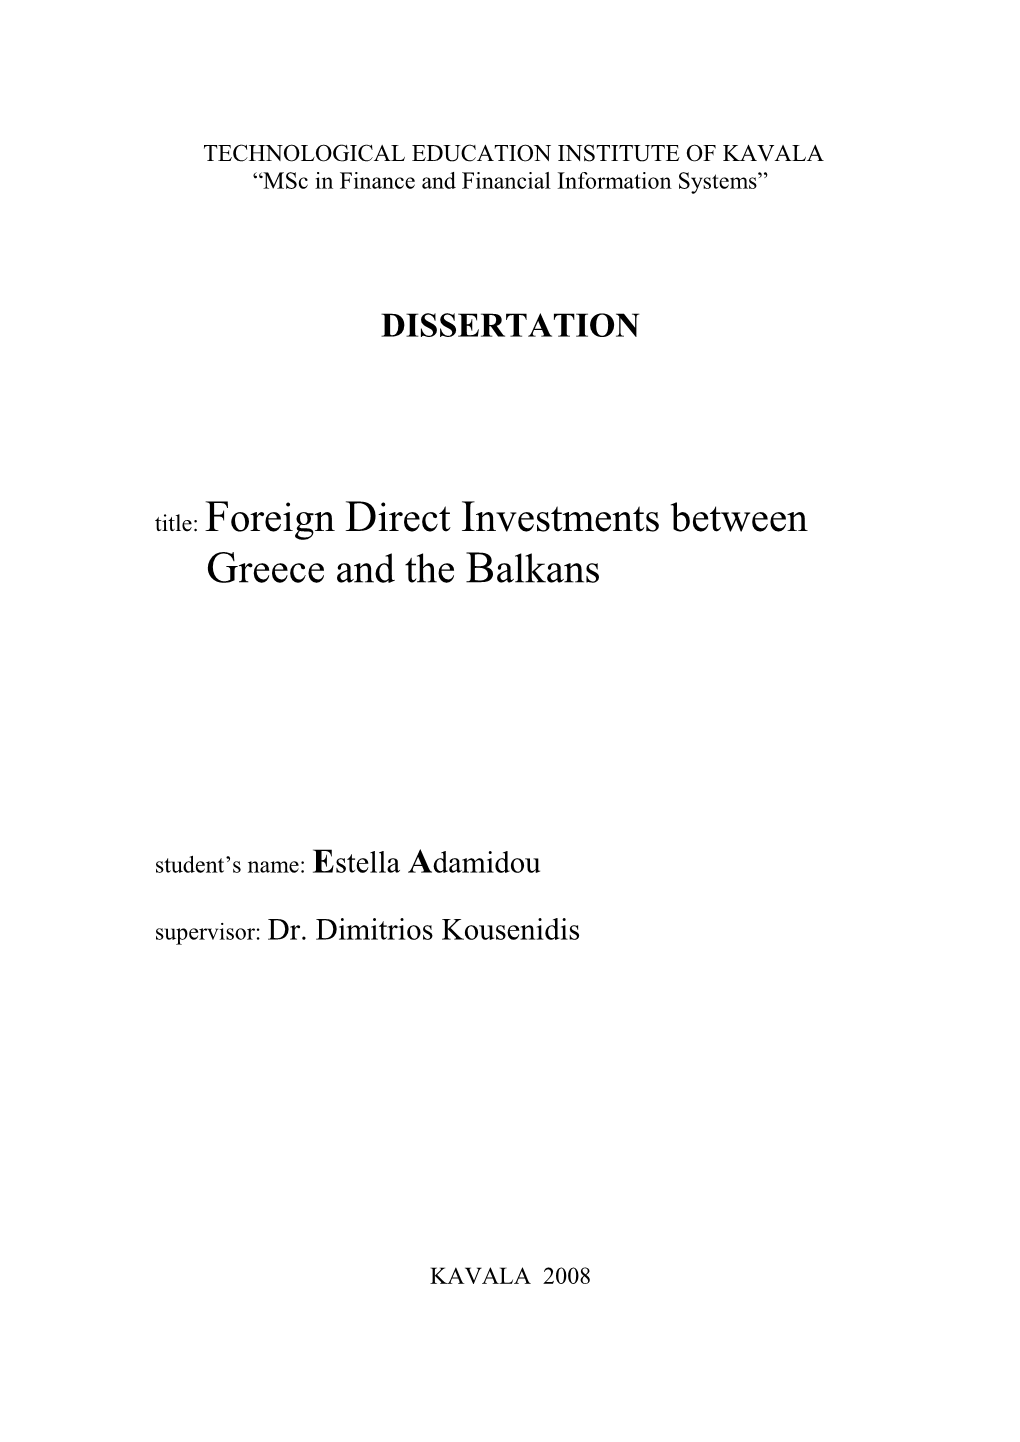 Chapter 1 –The Social, Political and Economical Situation of the Balkan Countries